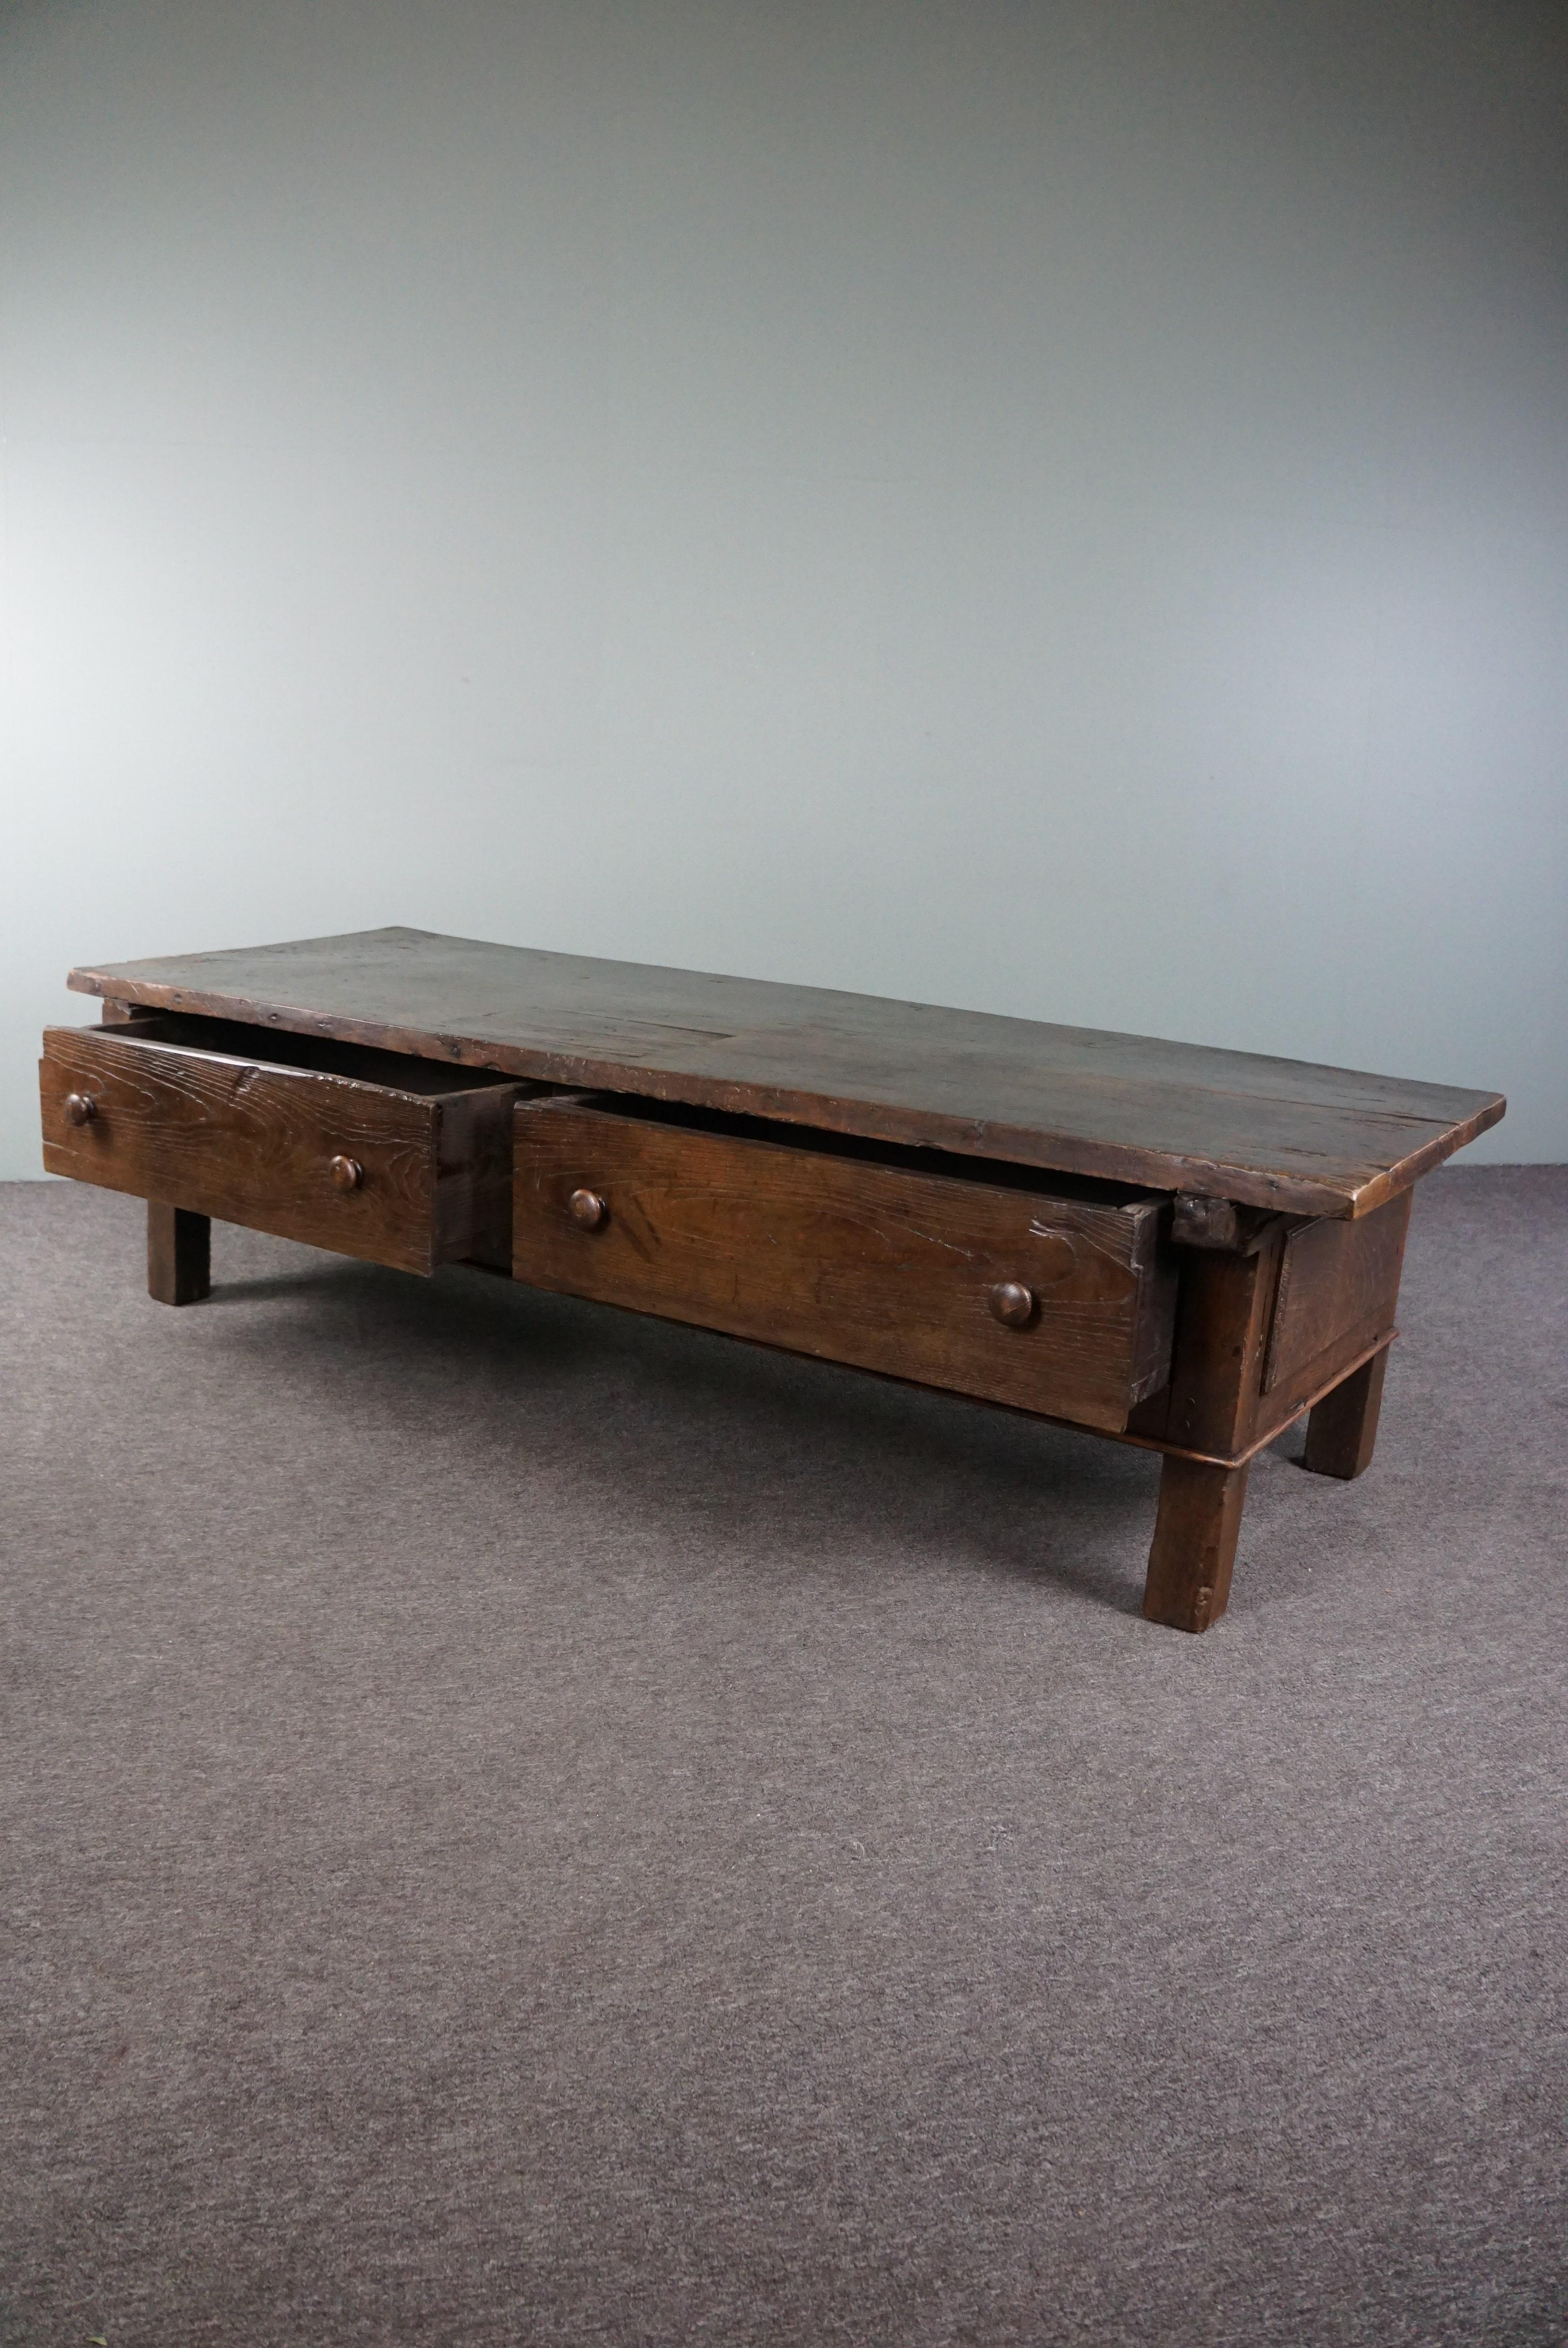 Offered is this antique coffee table with a single-piece tabletop originating from France. This exceptionally long antique French coffee table with a single-piece tabletop and two drawers is not just a piece of furniture; it's an heirloom soaked in